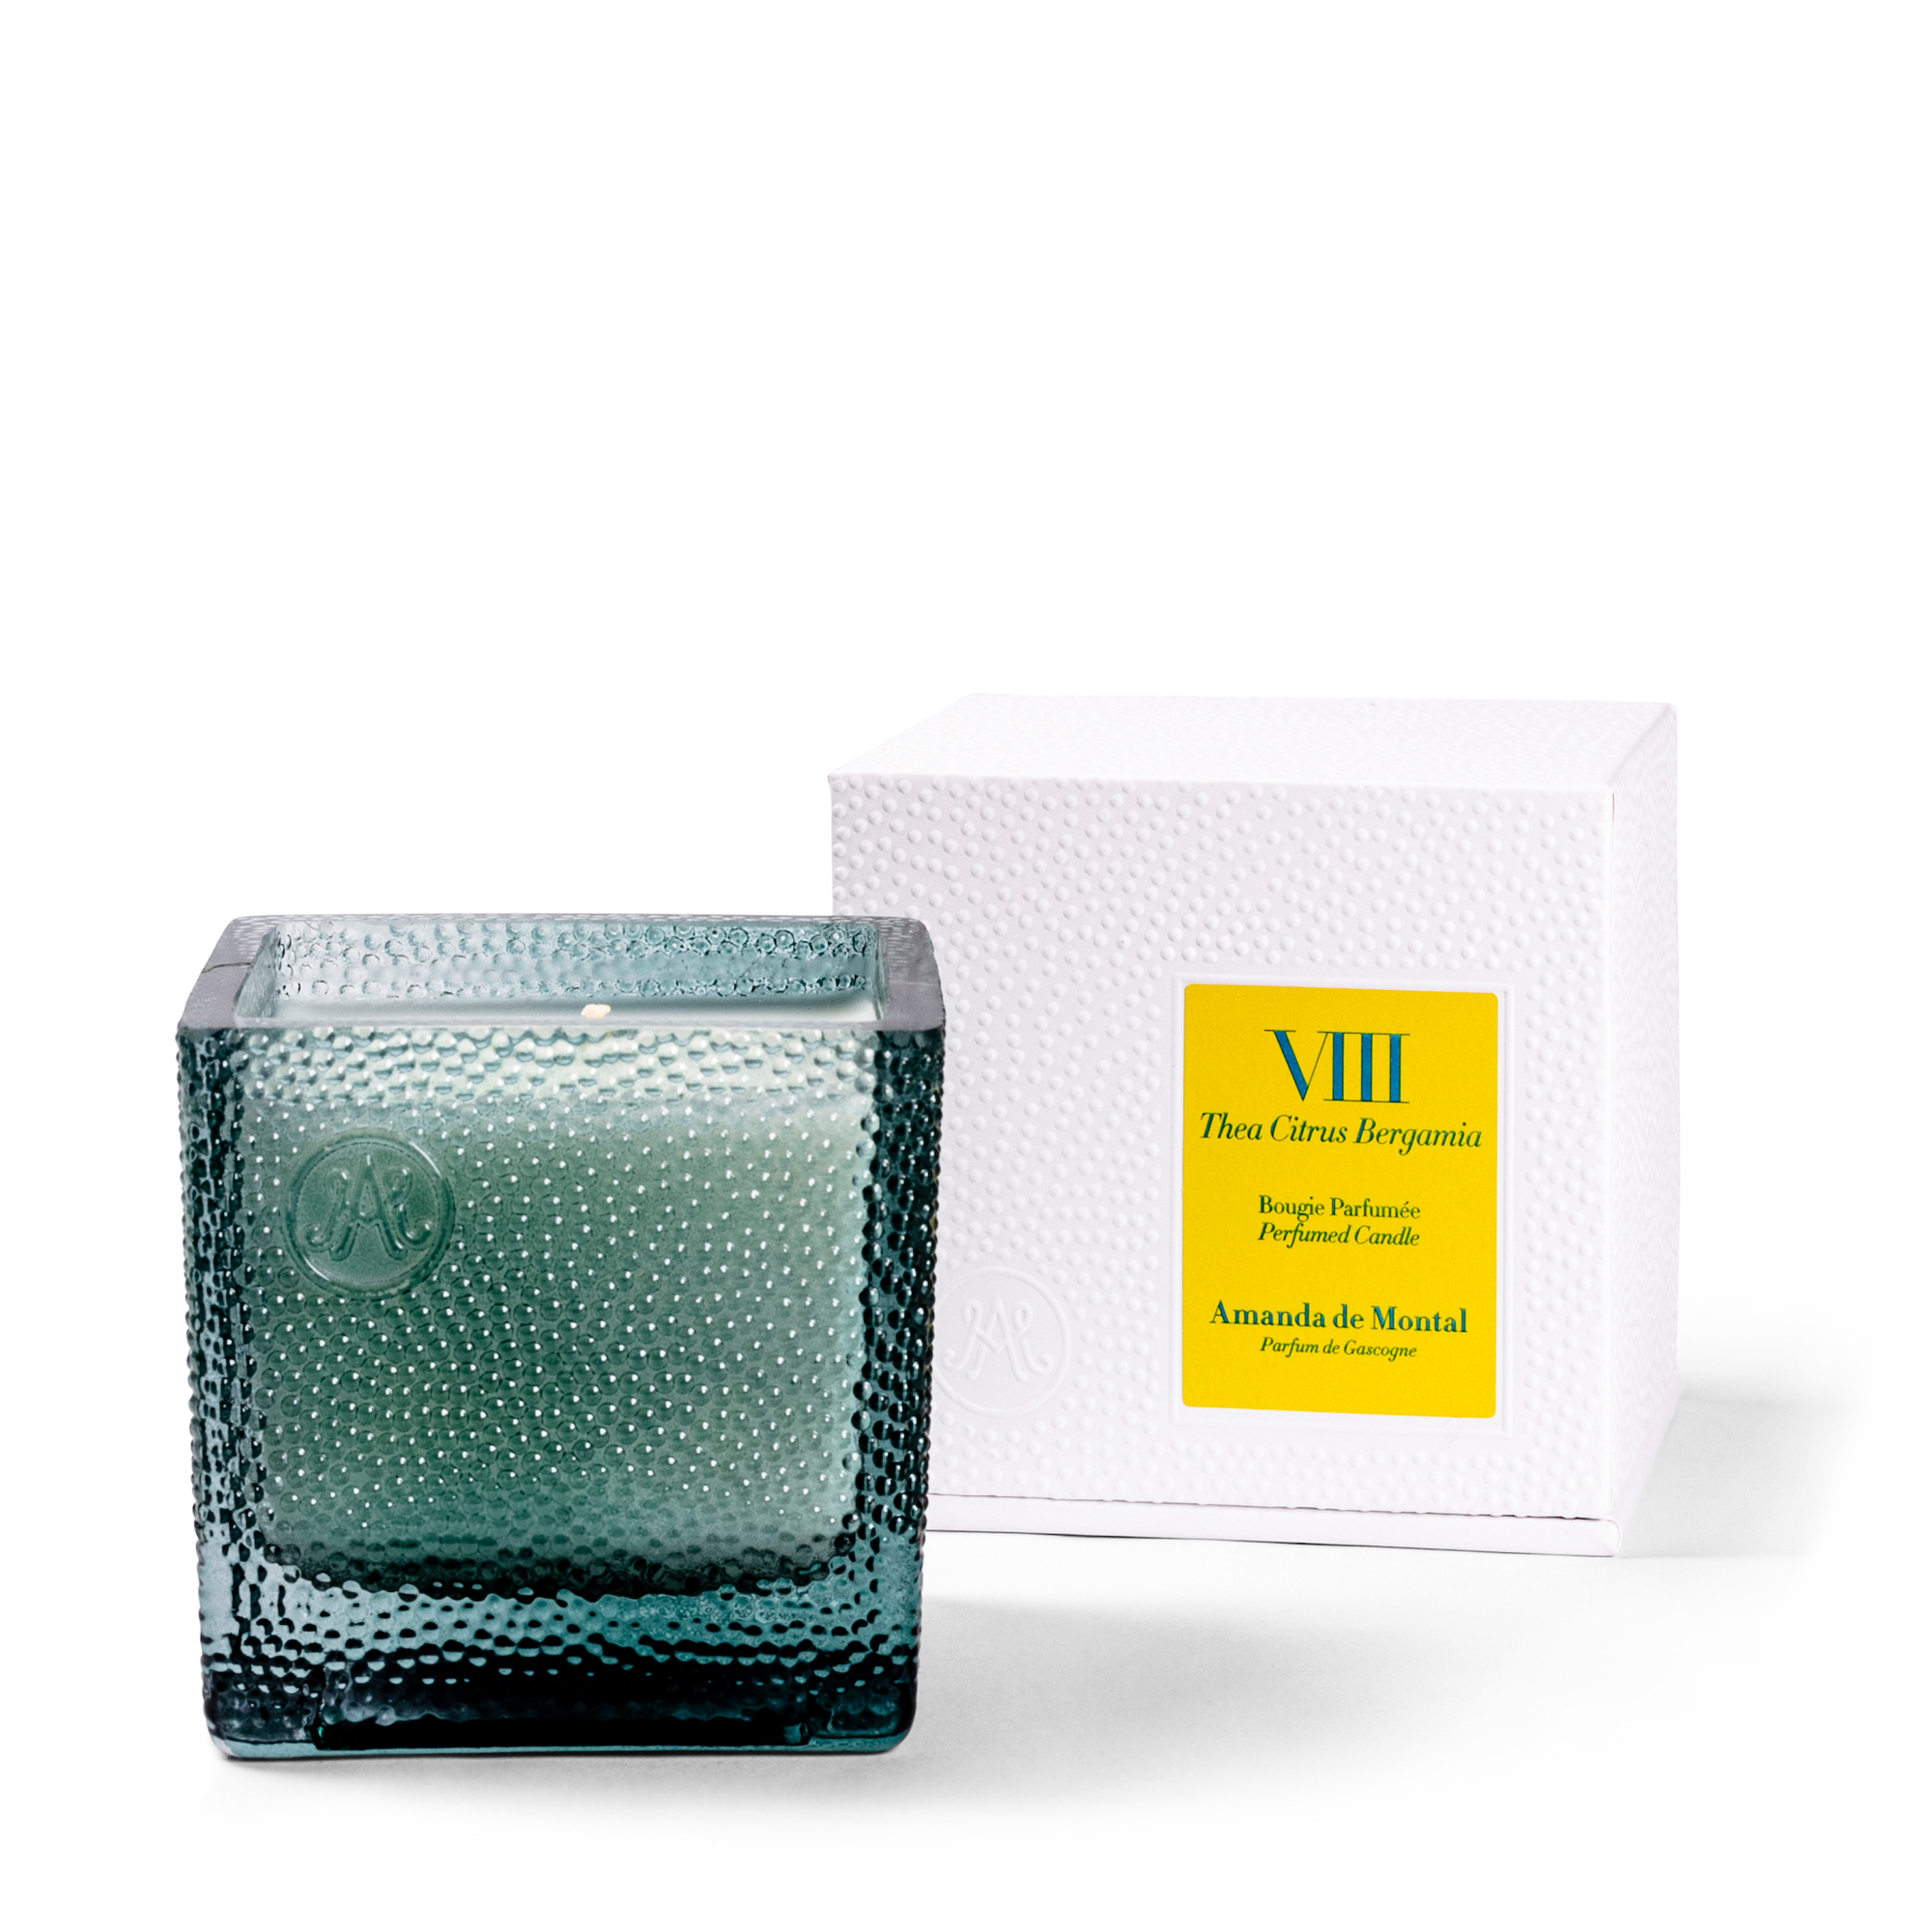 A candle with green tea scent complemented with hints of bergamot, evoking the taste of succulent local lemons in a lemon tart. Held in an artisanal blue glass vessel with thousands of bubbles and a twinkling flame.